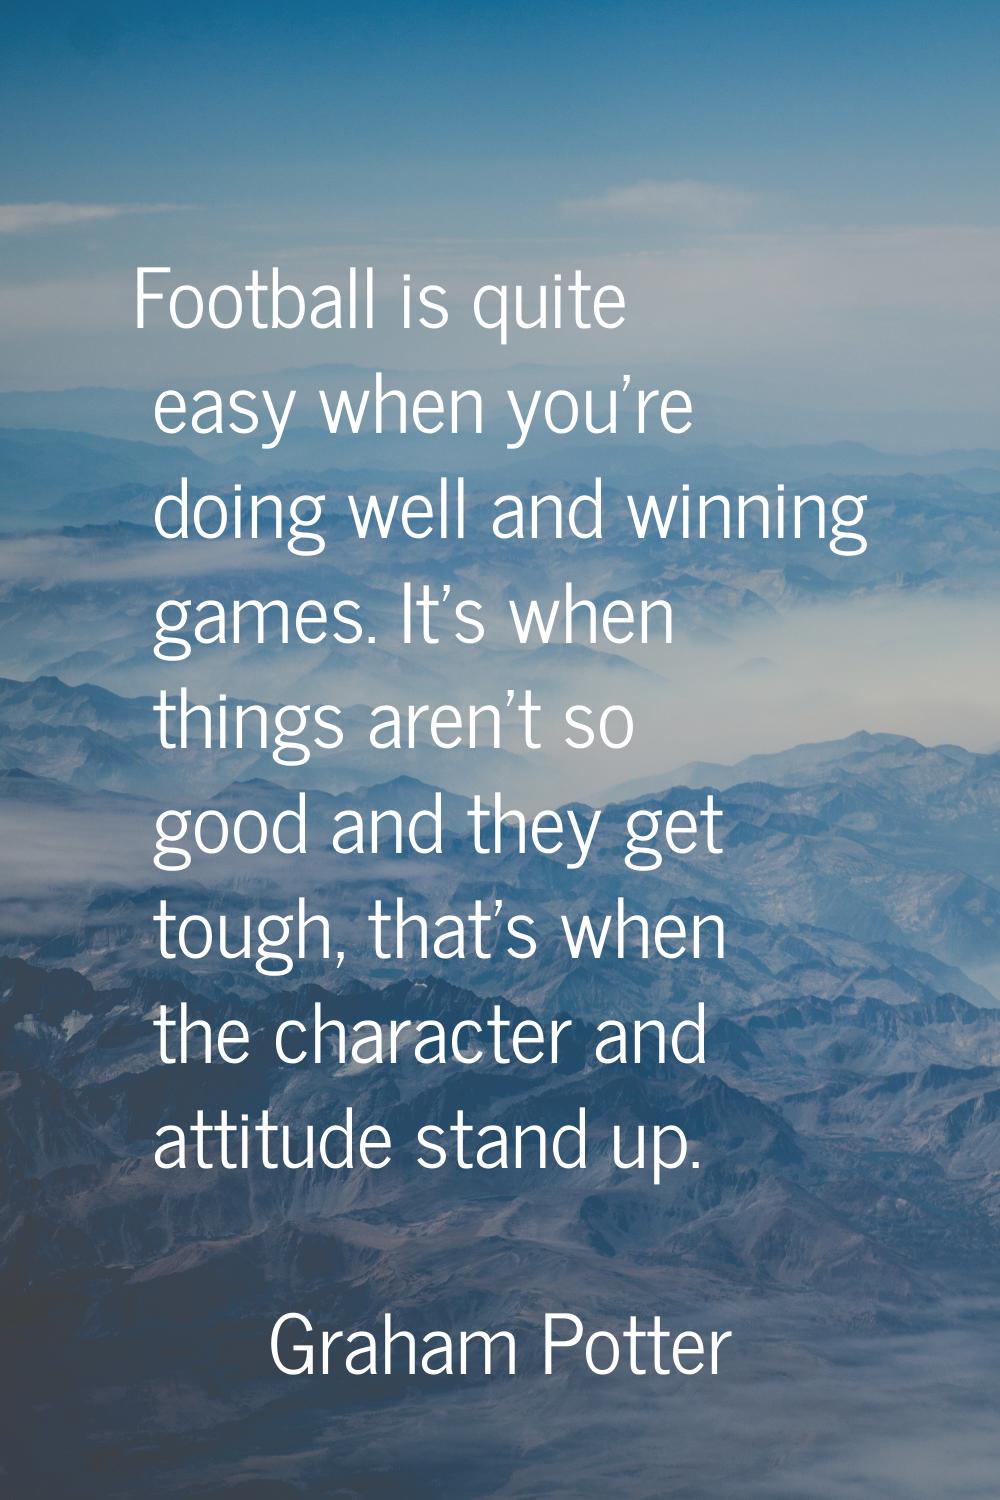 Football is quite easy when you're doing well and winning games. It's when things aren't so good an